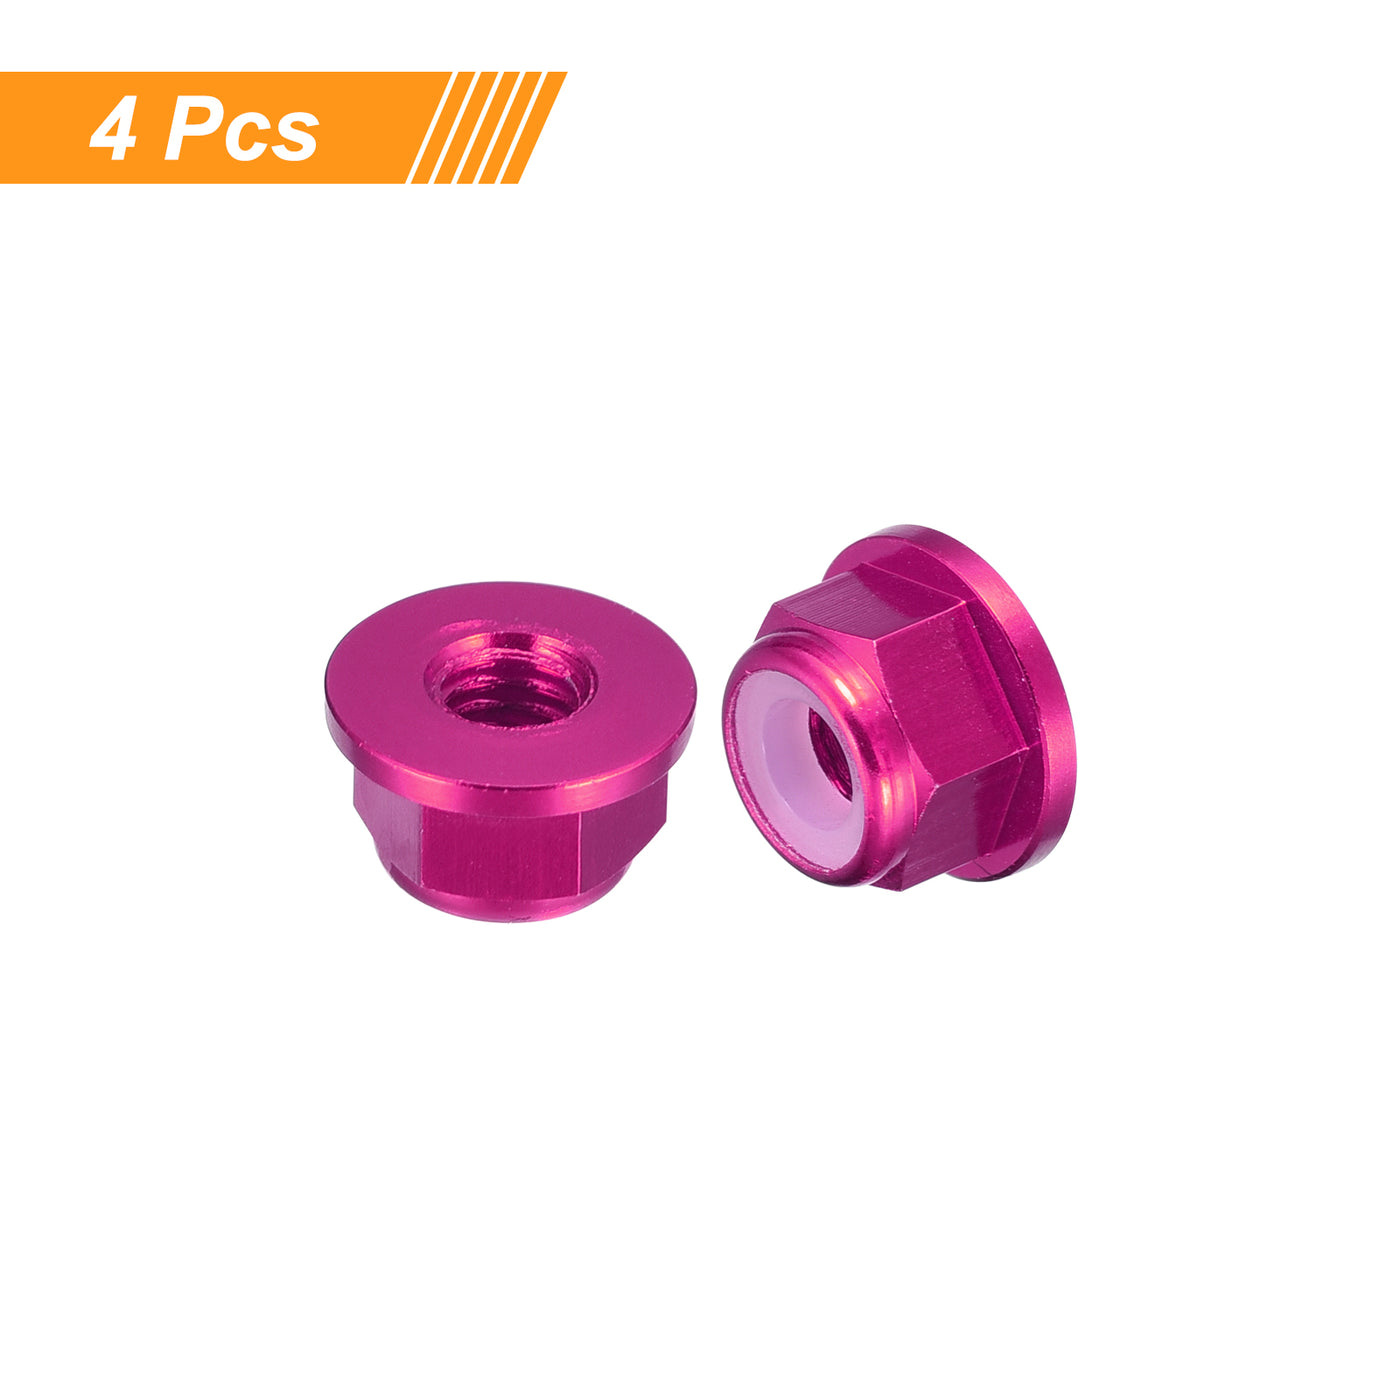 uxcell Uxcell Nylon Insert Hex Lock Nuts, 4pcs - M5 x 0.8mm Aluminum Alloy Self-Locking Nut, Anodizing Flange Lock Nut for Fasteners (Pink)